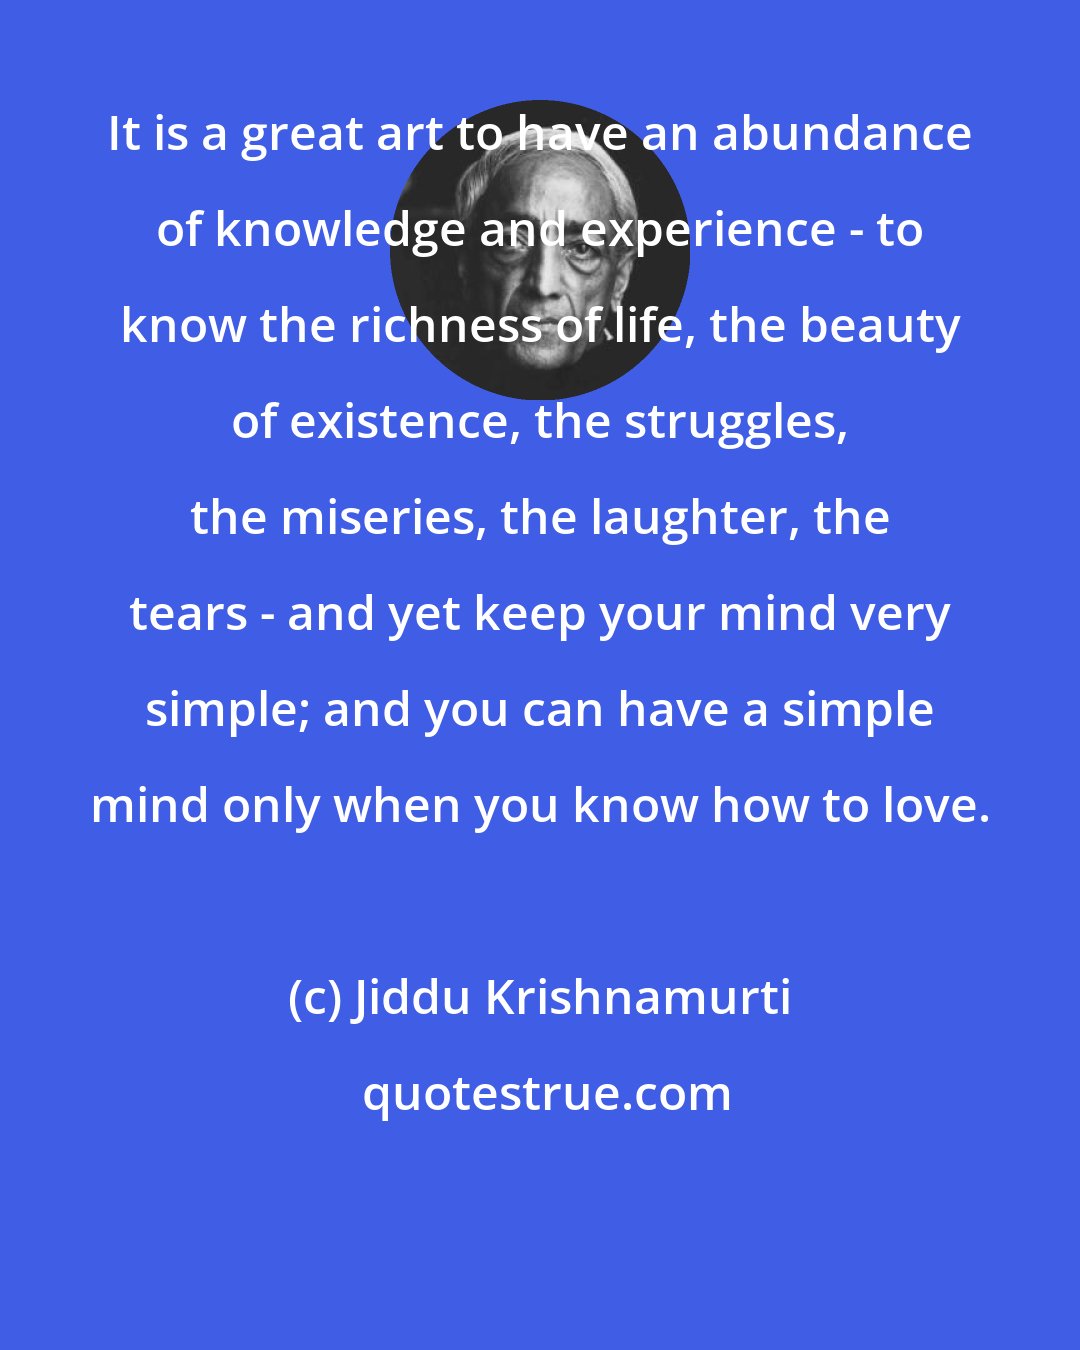 Jiddu Krishnamurti: It is a great art to have an abundance of knowledge and experience - to know the richness of life, the beauty of existence, the struggles, the miseries, the laughter, the tears - and yet keep your mind very simple; and you can have a simple mind only when you know how to love.